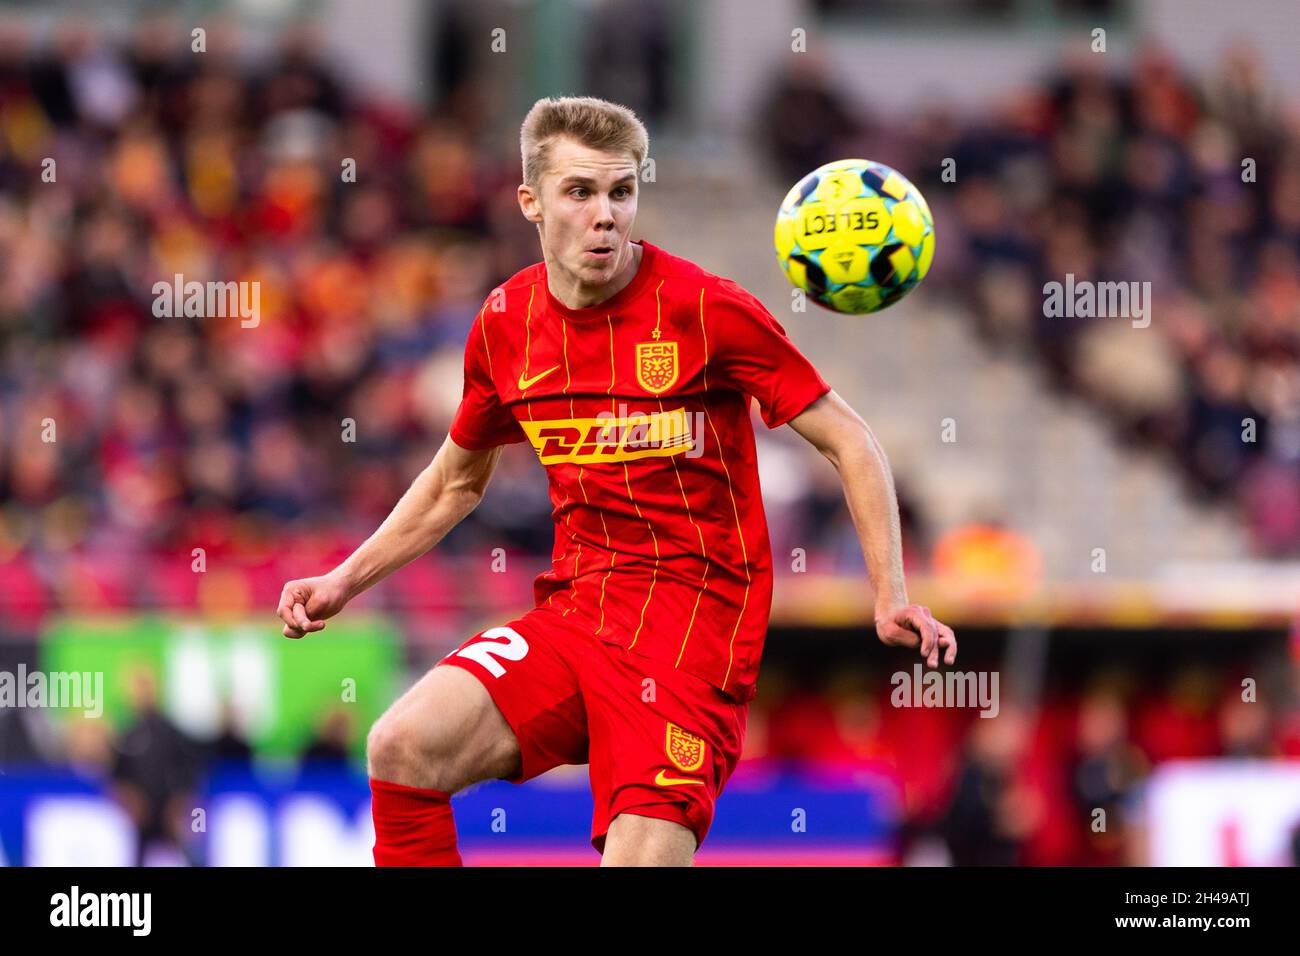 Page 2 - Fodbold High Resolution Stock Photography and Images - Alamy